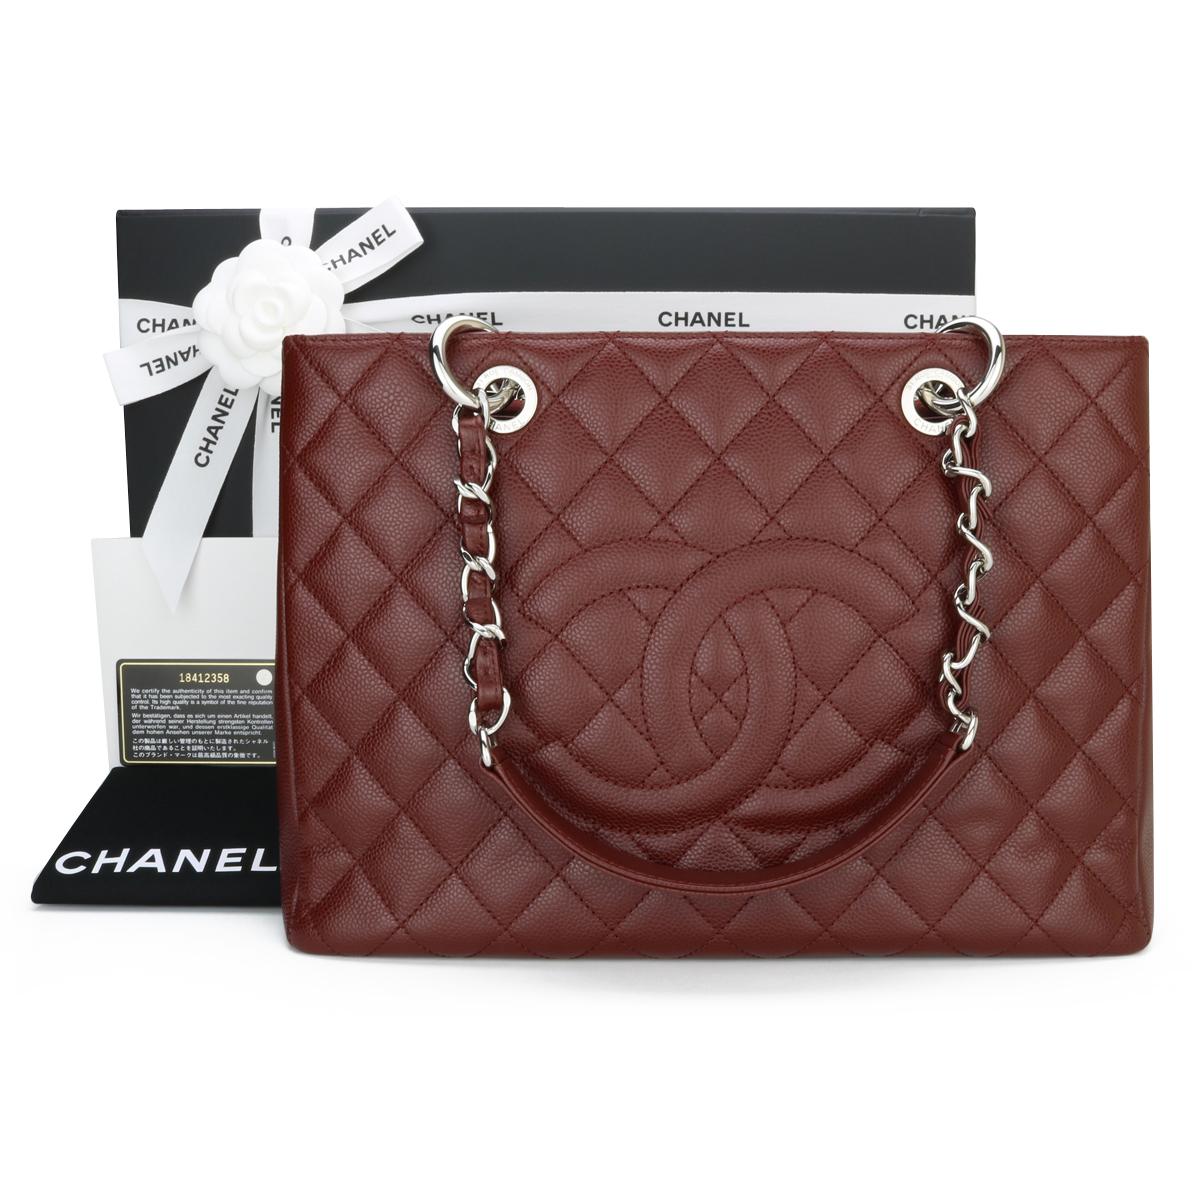 CHANEL Grand Shopping Tote (GST) Burgundy Caviar with Silver Hardware 2014.

This bag is in excellent condition, the bag still holds its shape well, and the hardware is still very shiny.

As Chanel has discontinued the Grand Shopping Tote (GST), it